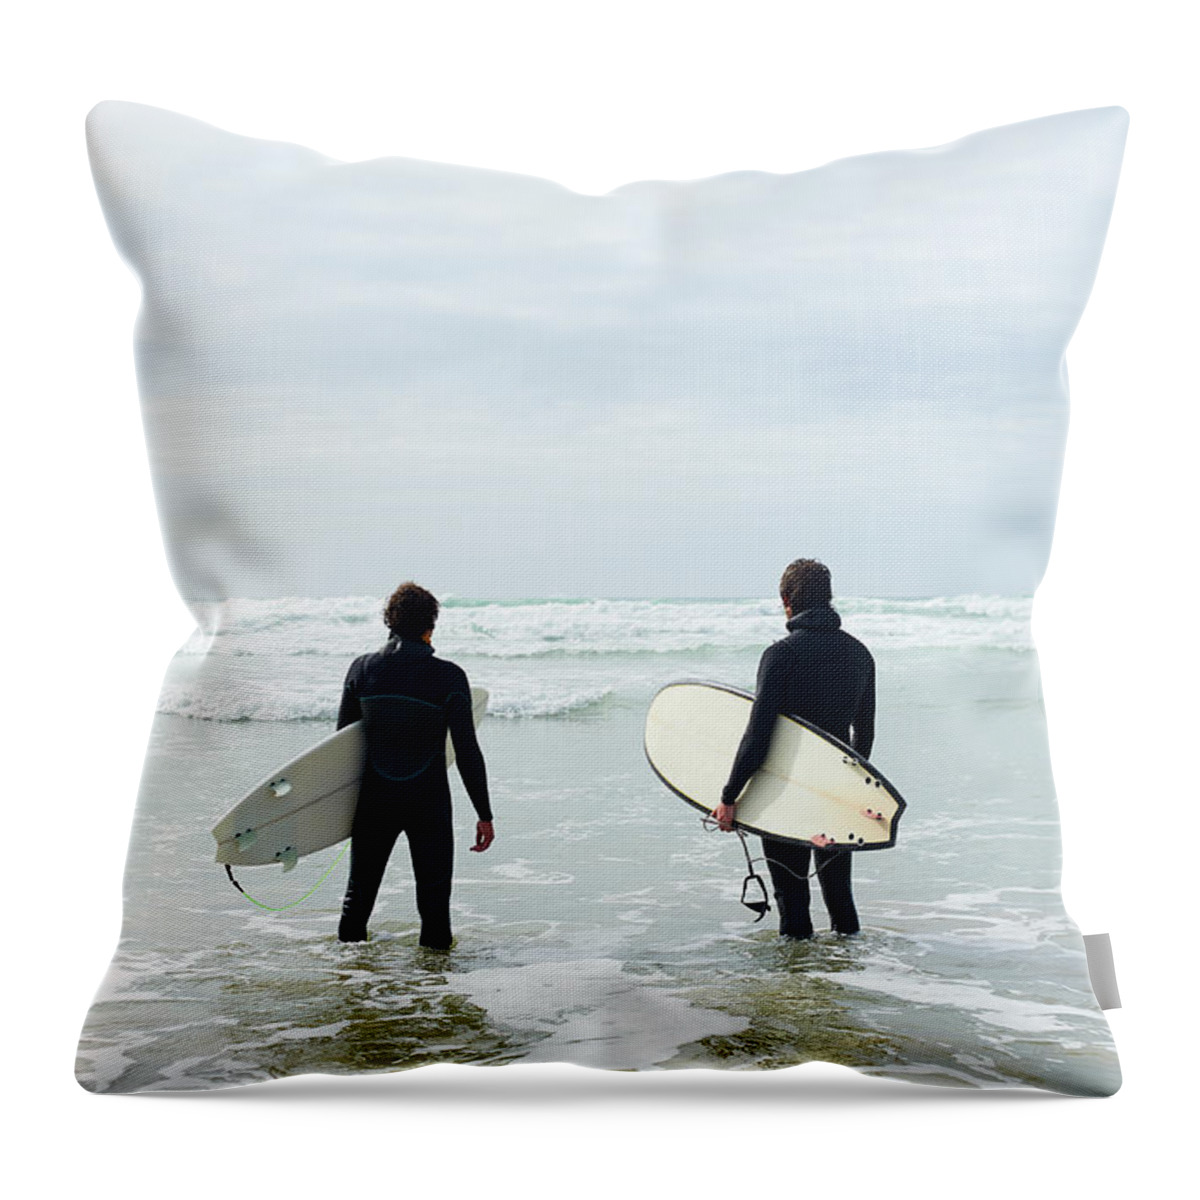 People Throw Pillow featuring the photograph Surfers Stand With Their Boards Looking by Dougal Waters